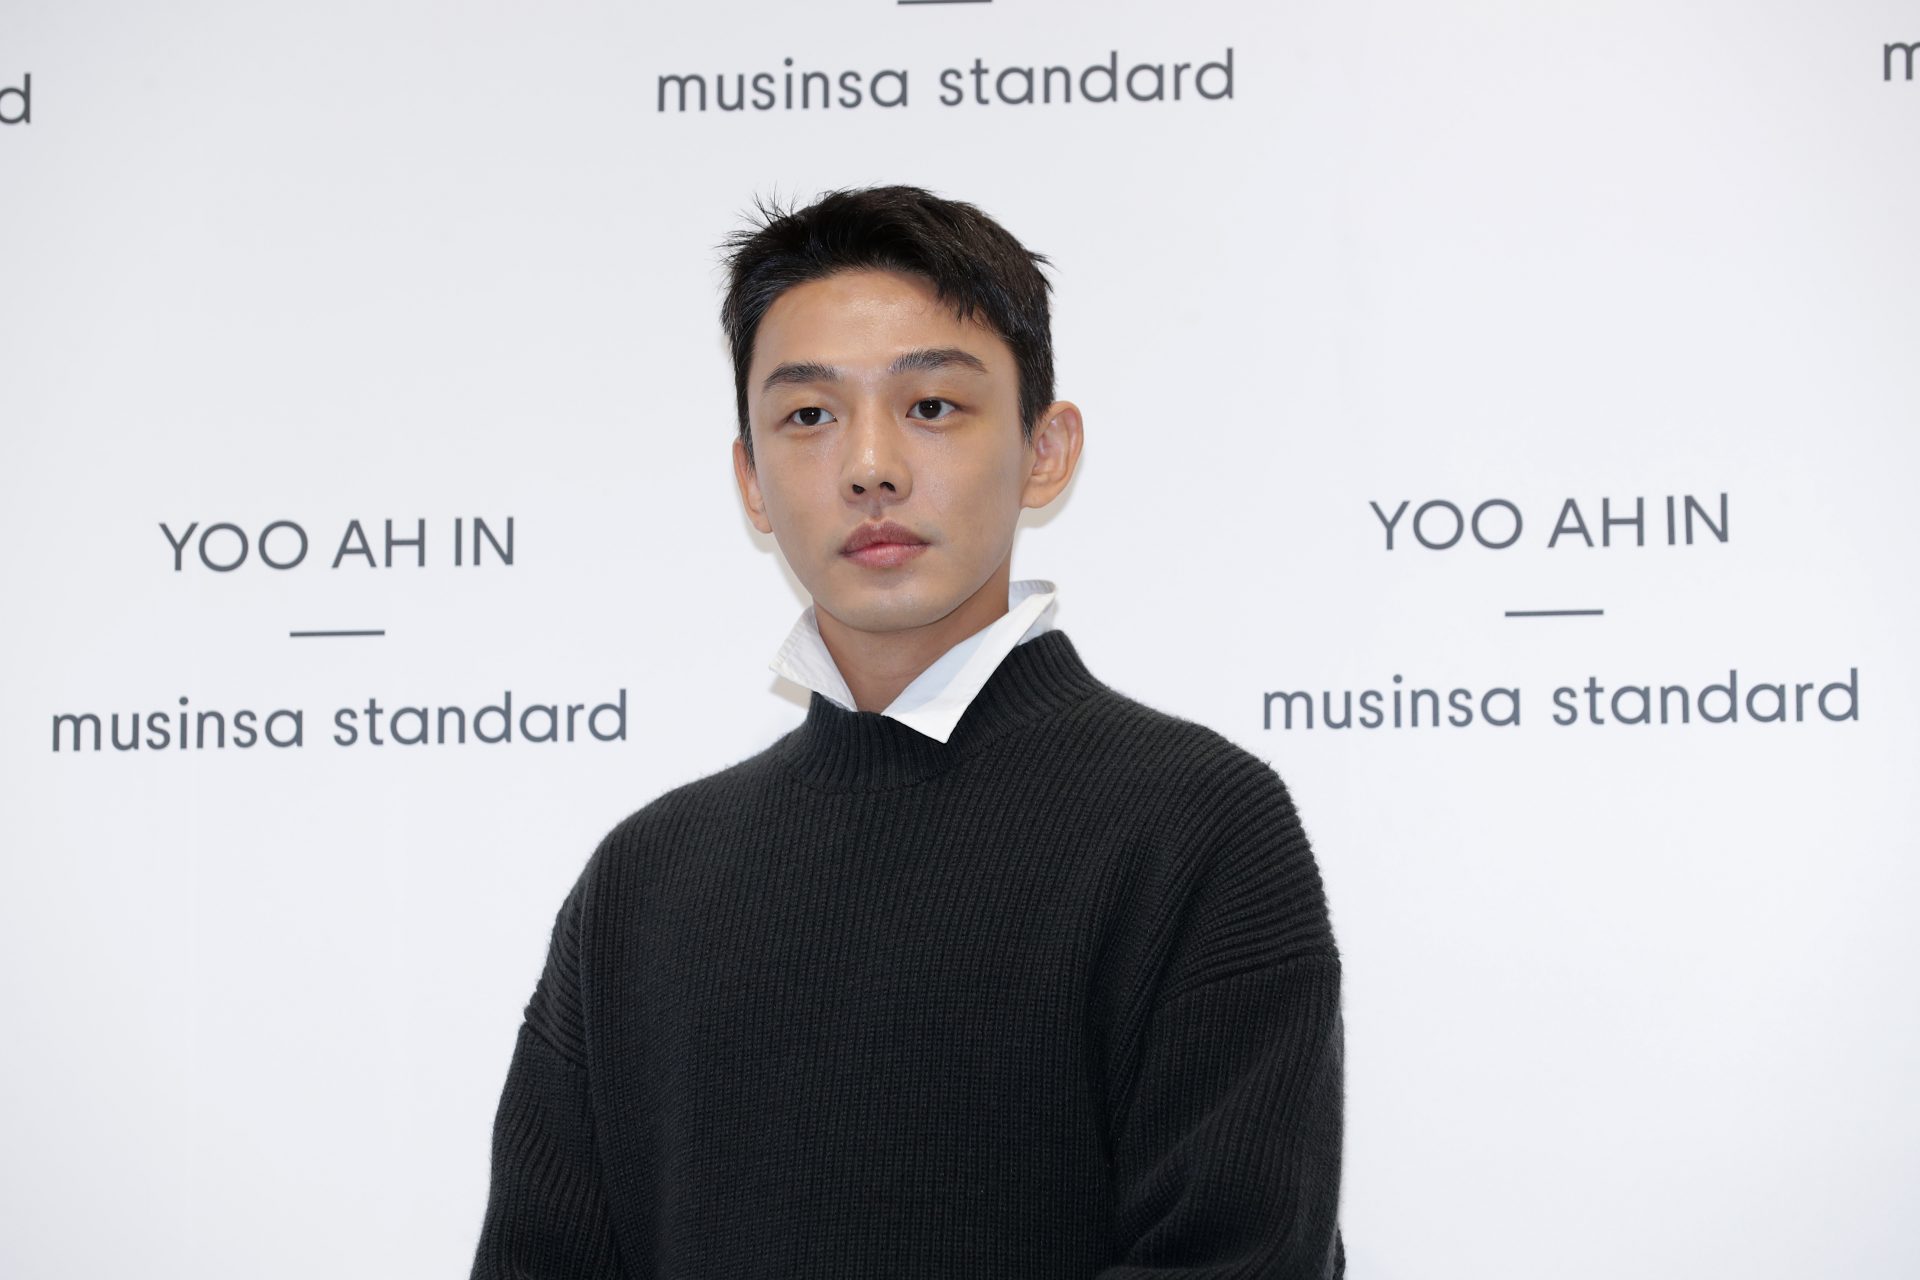 Yoo Ah-in's drug use got him cancelled